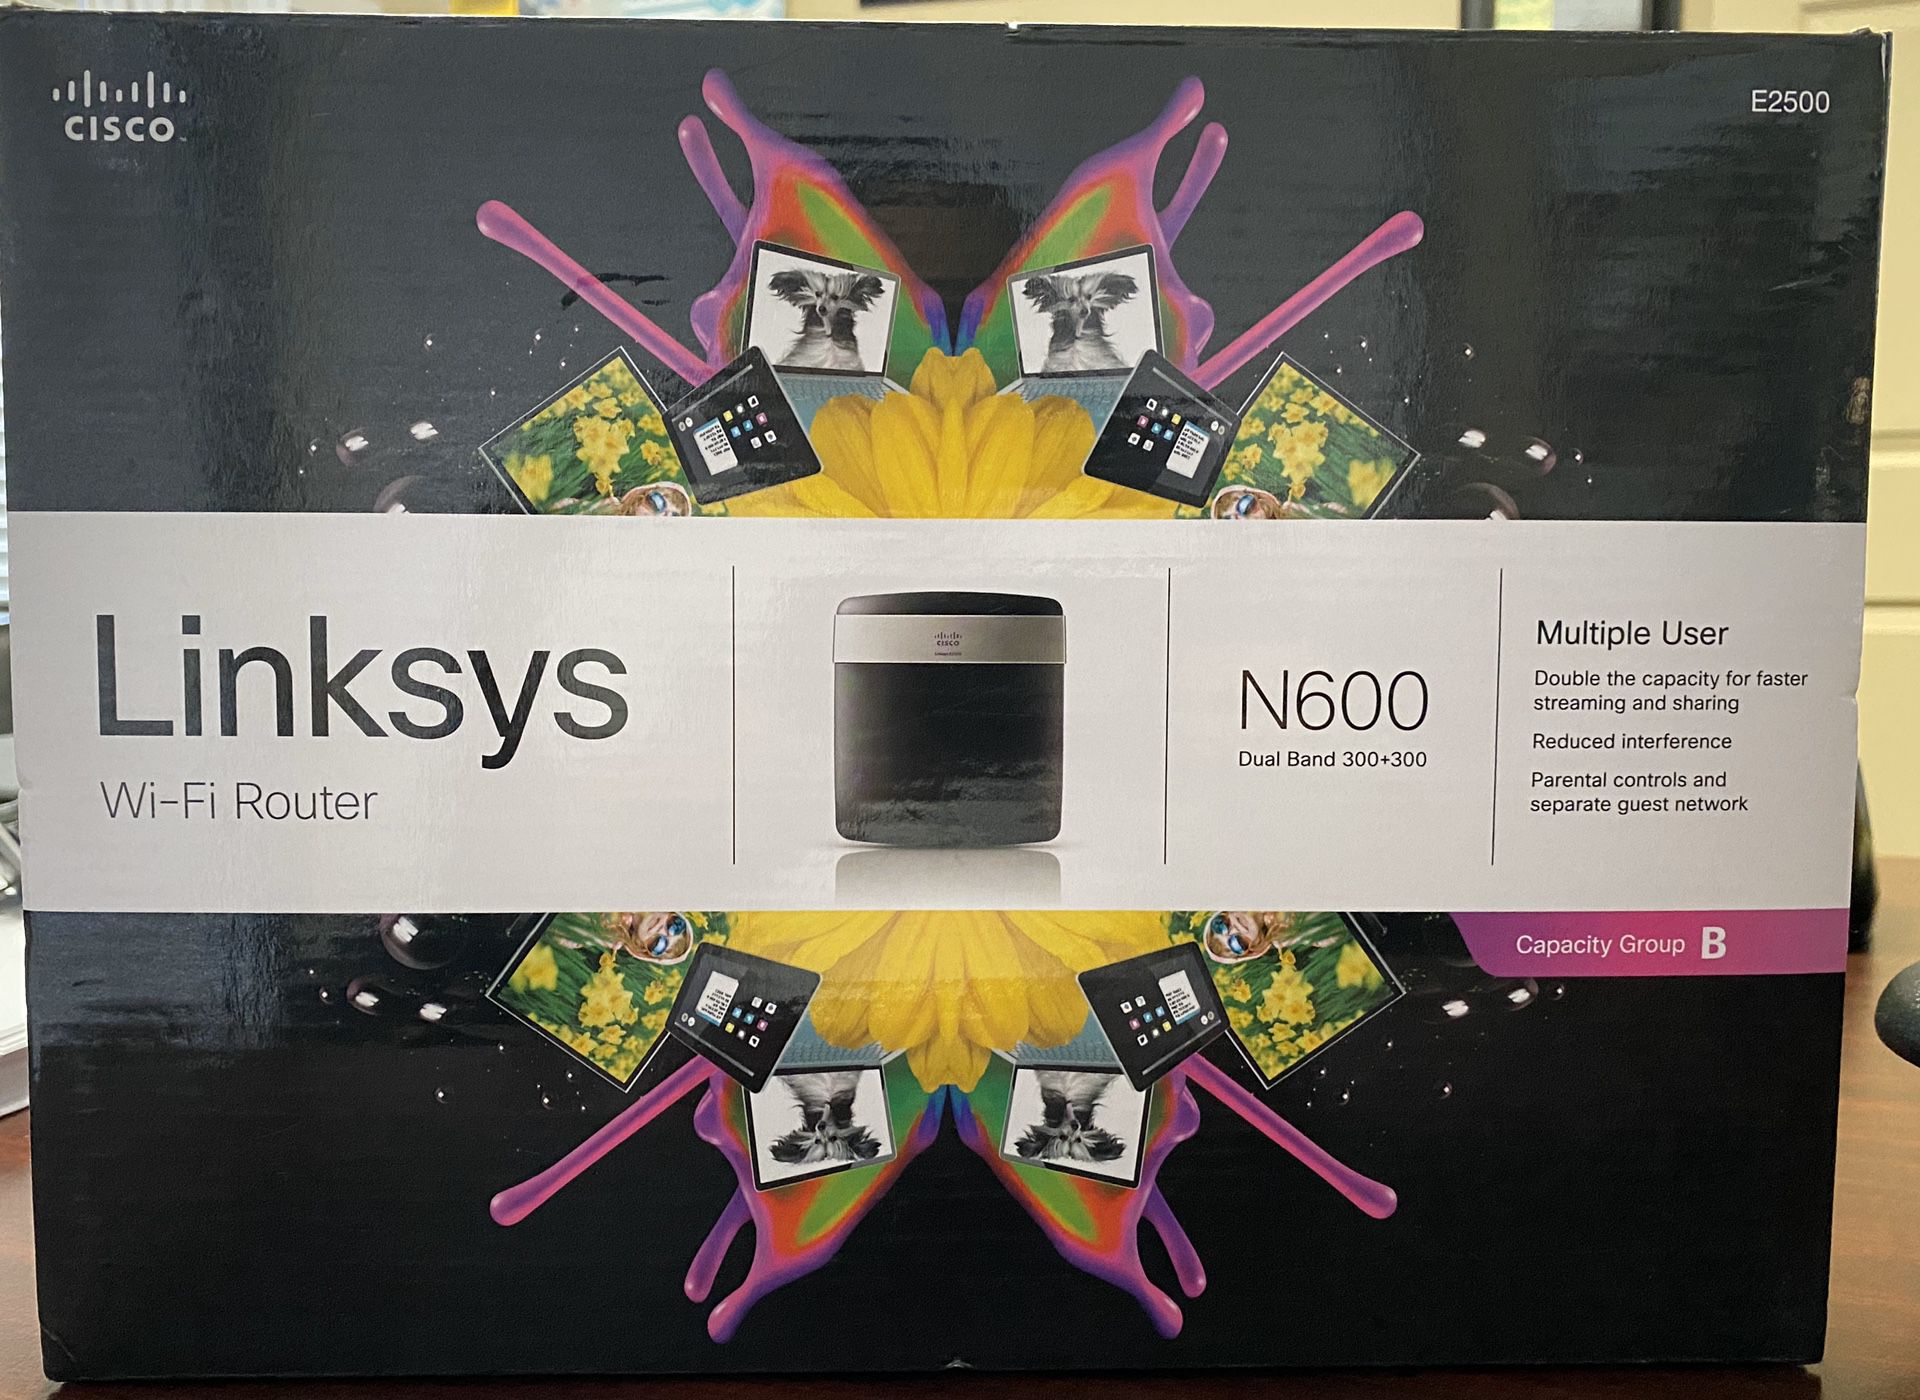 Linksys N600 Dual Band Wi-Fi Router